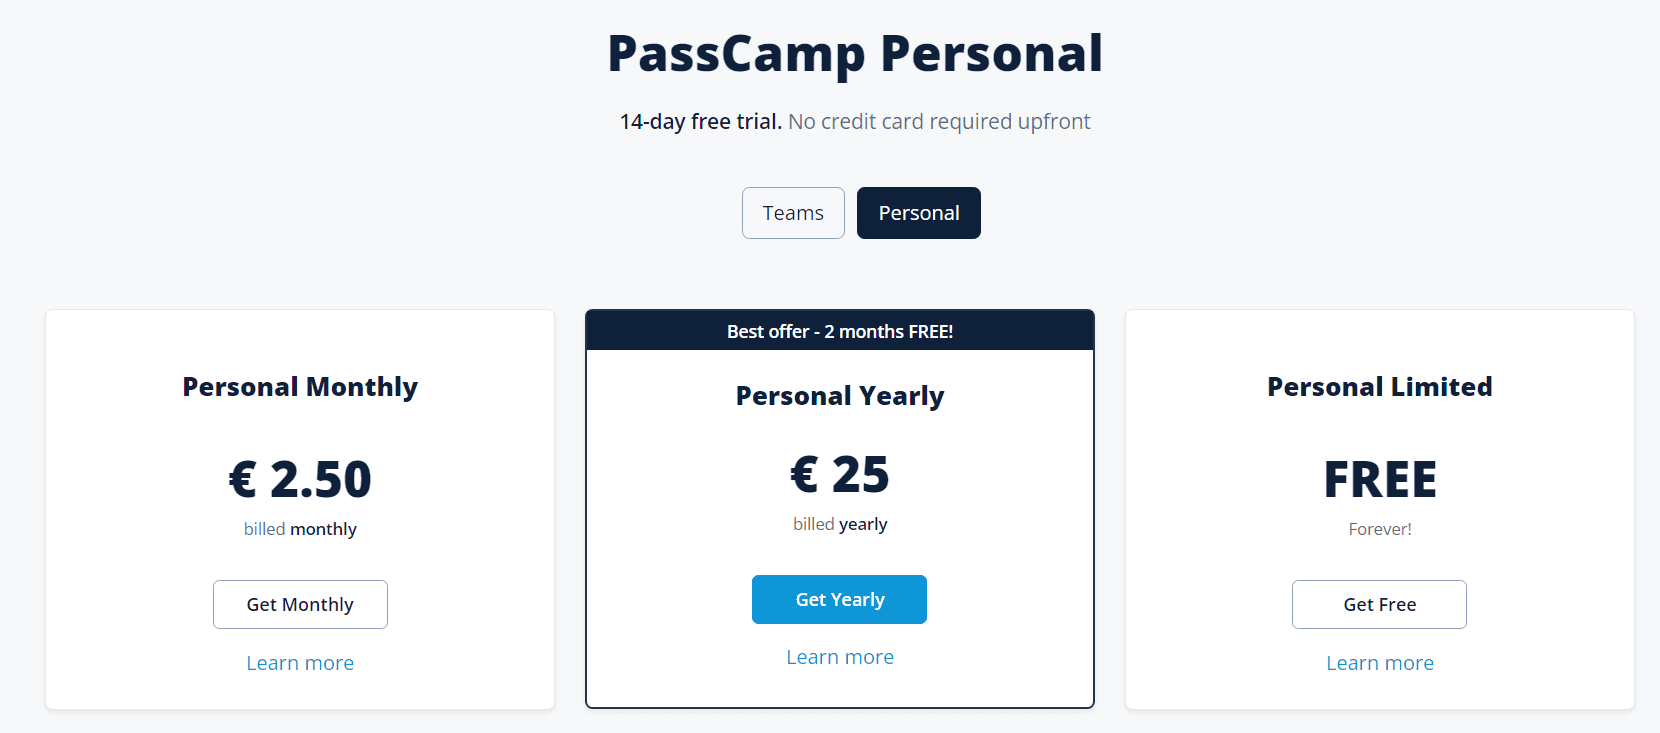 PassCamp Plans and Pricing